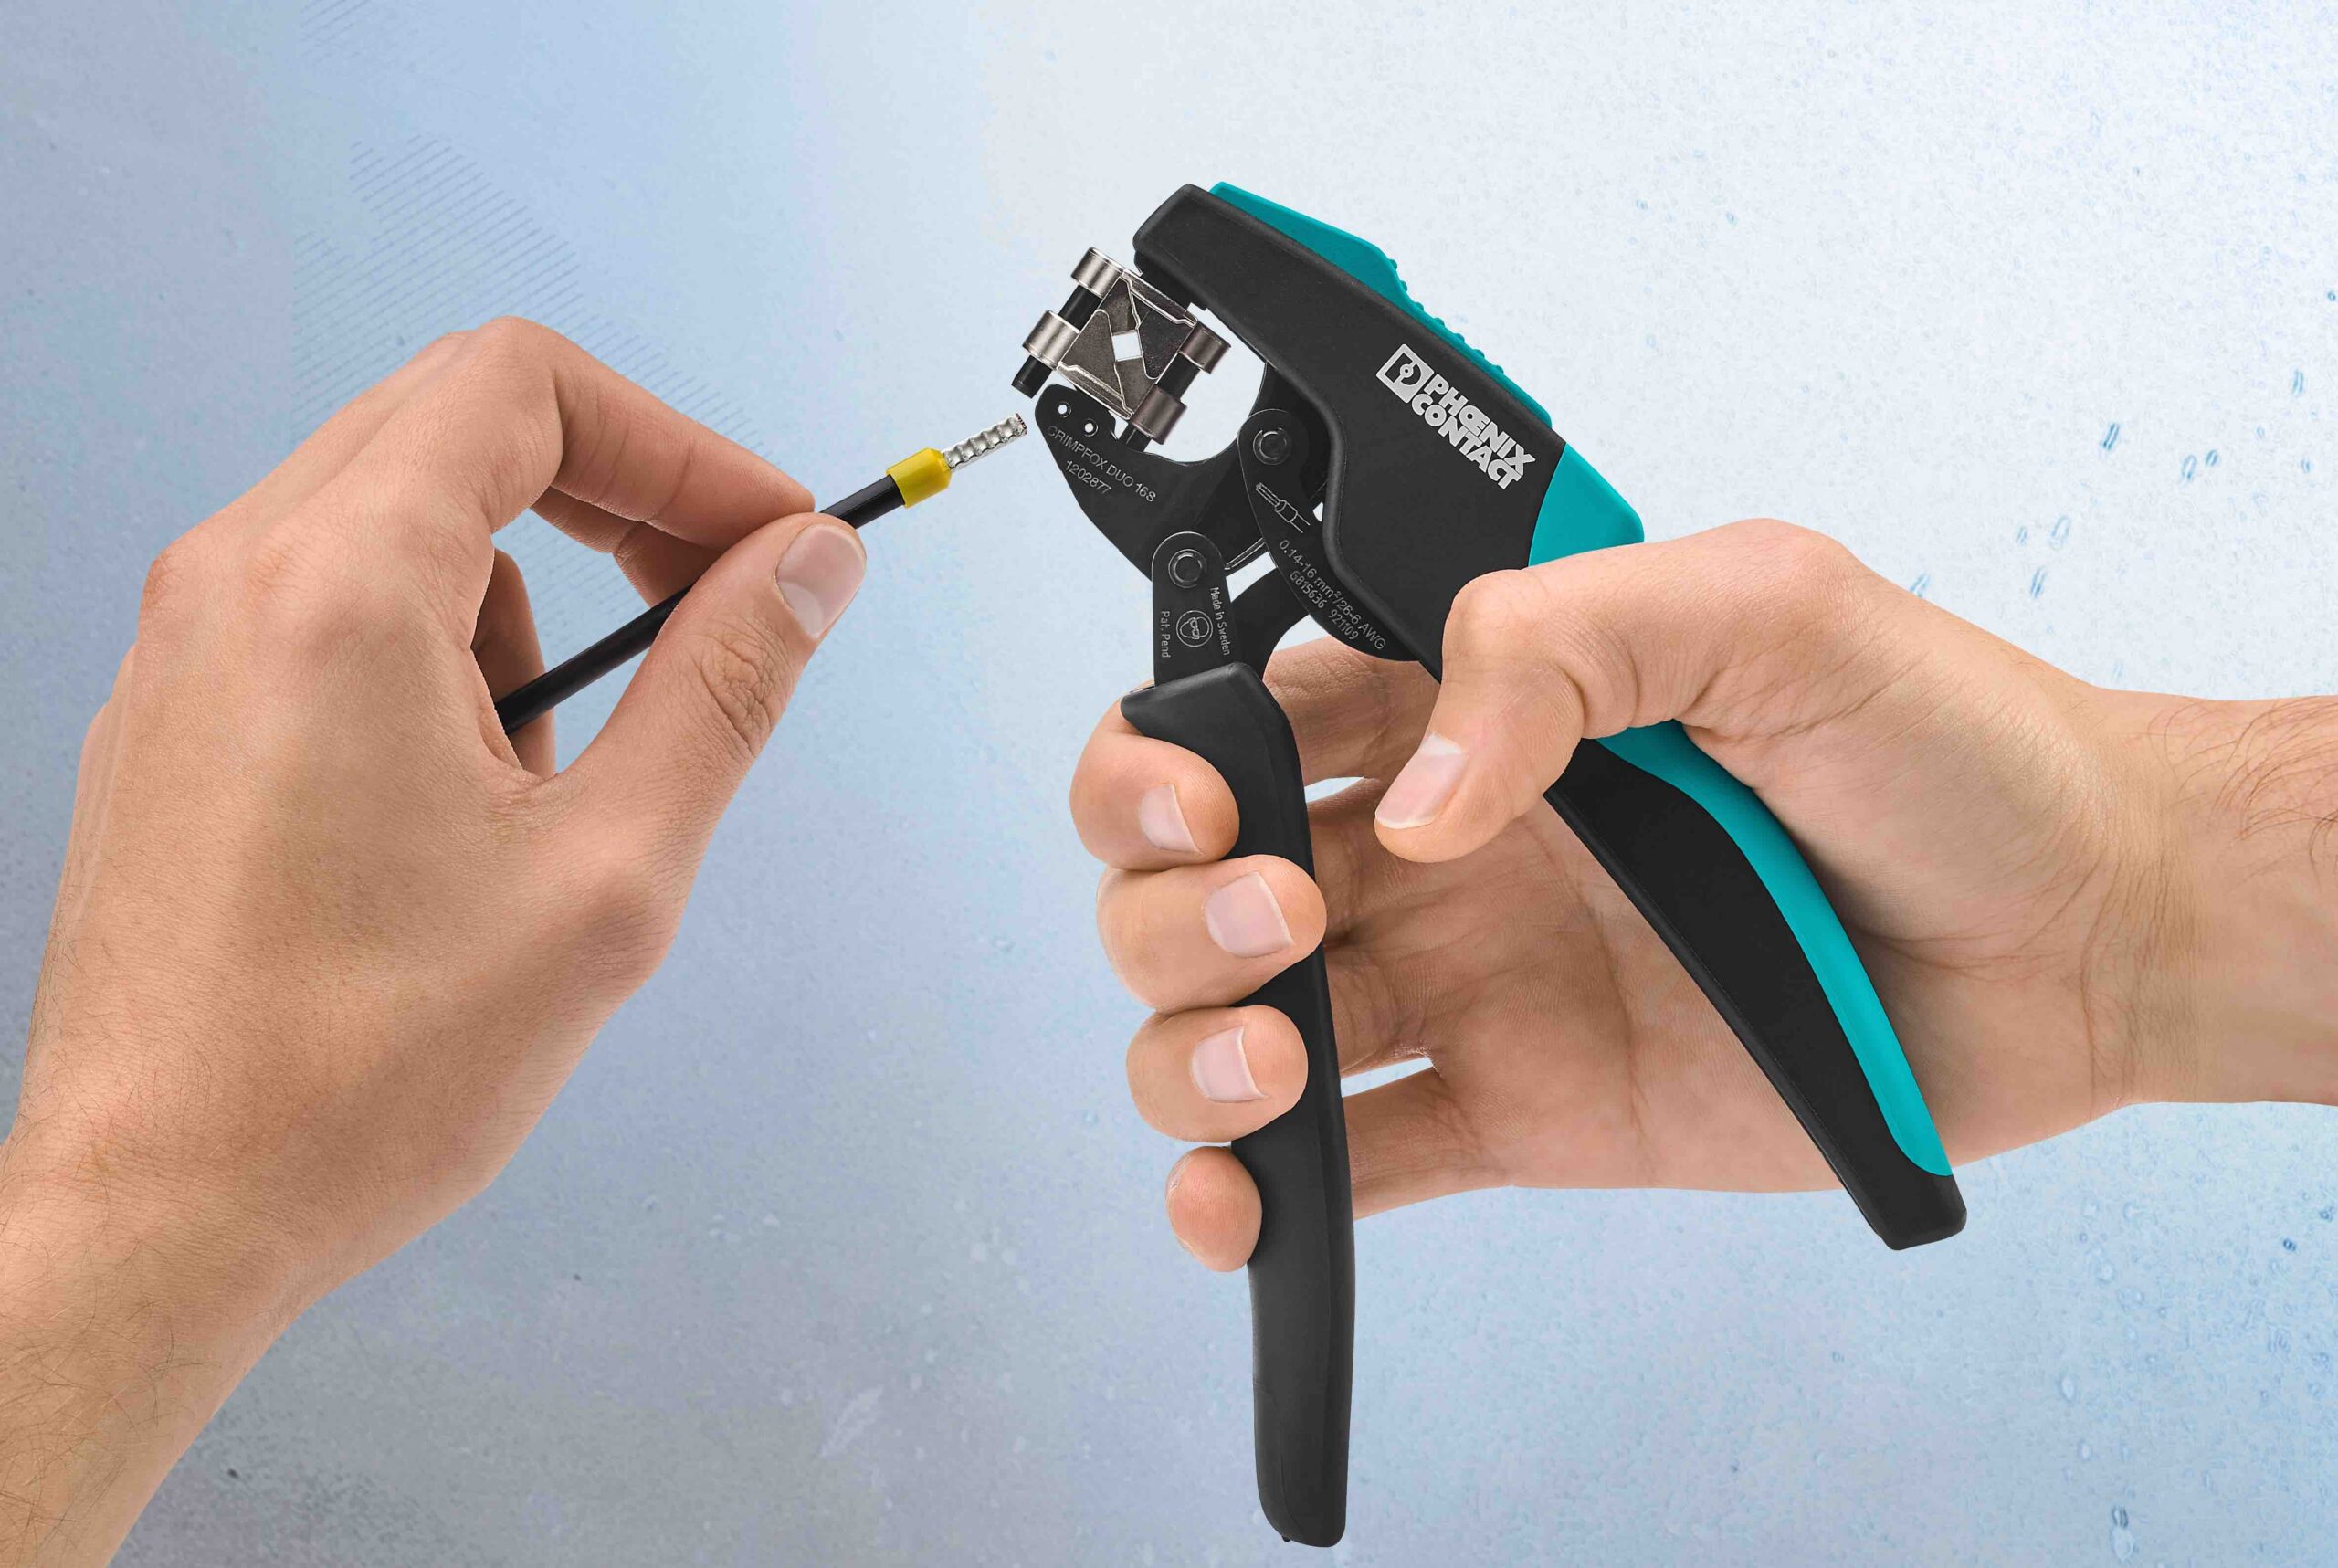 Crimping tool allows both frontal and lateral ferrule feed